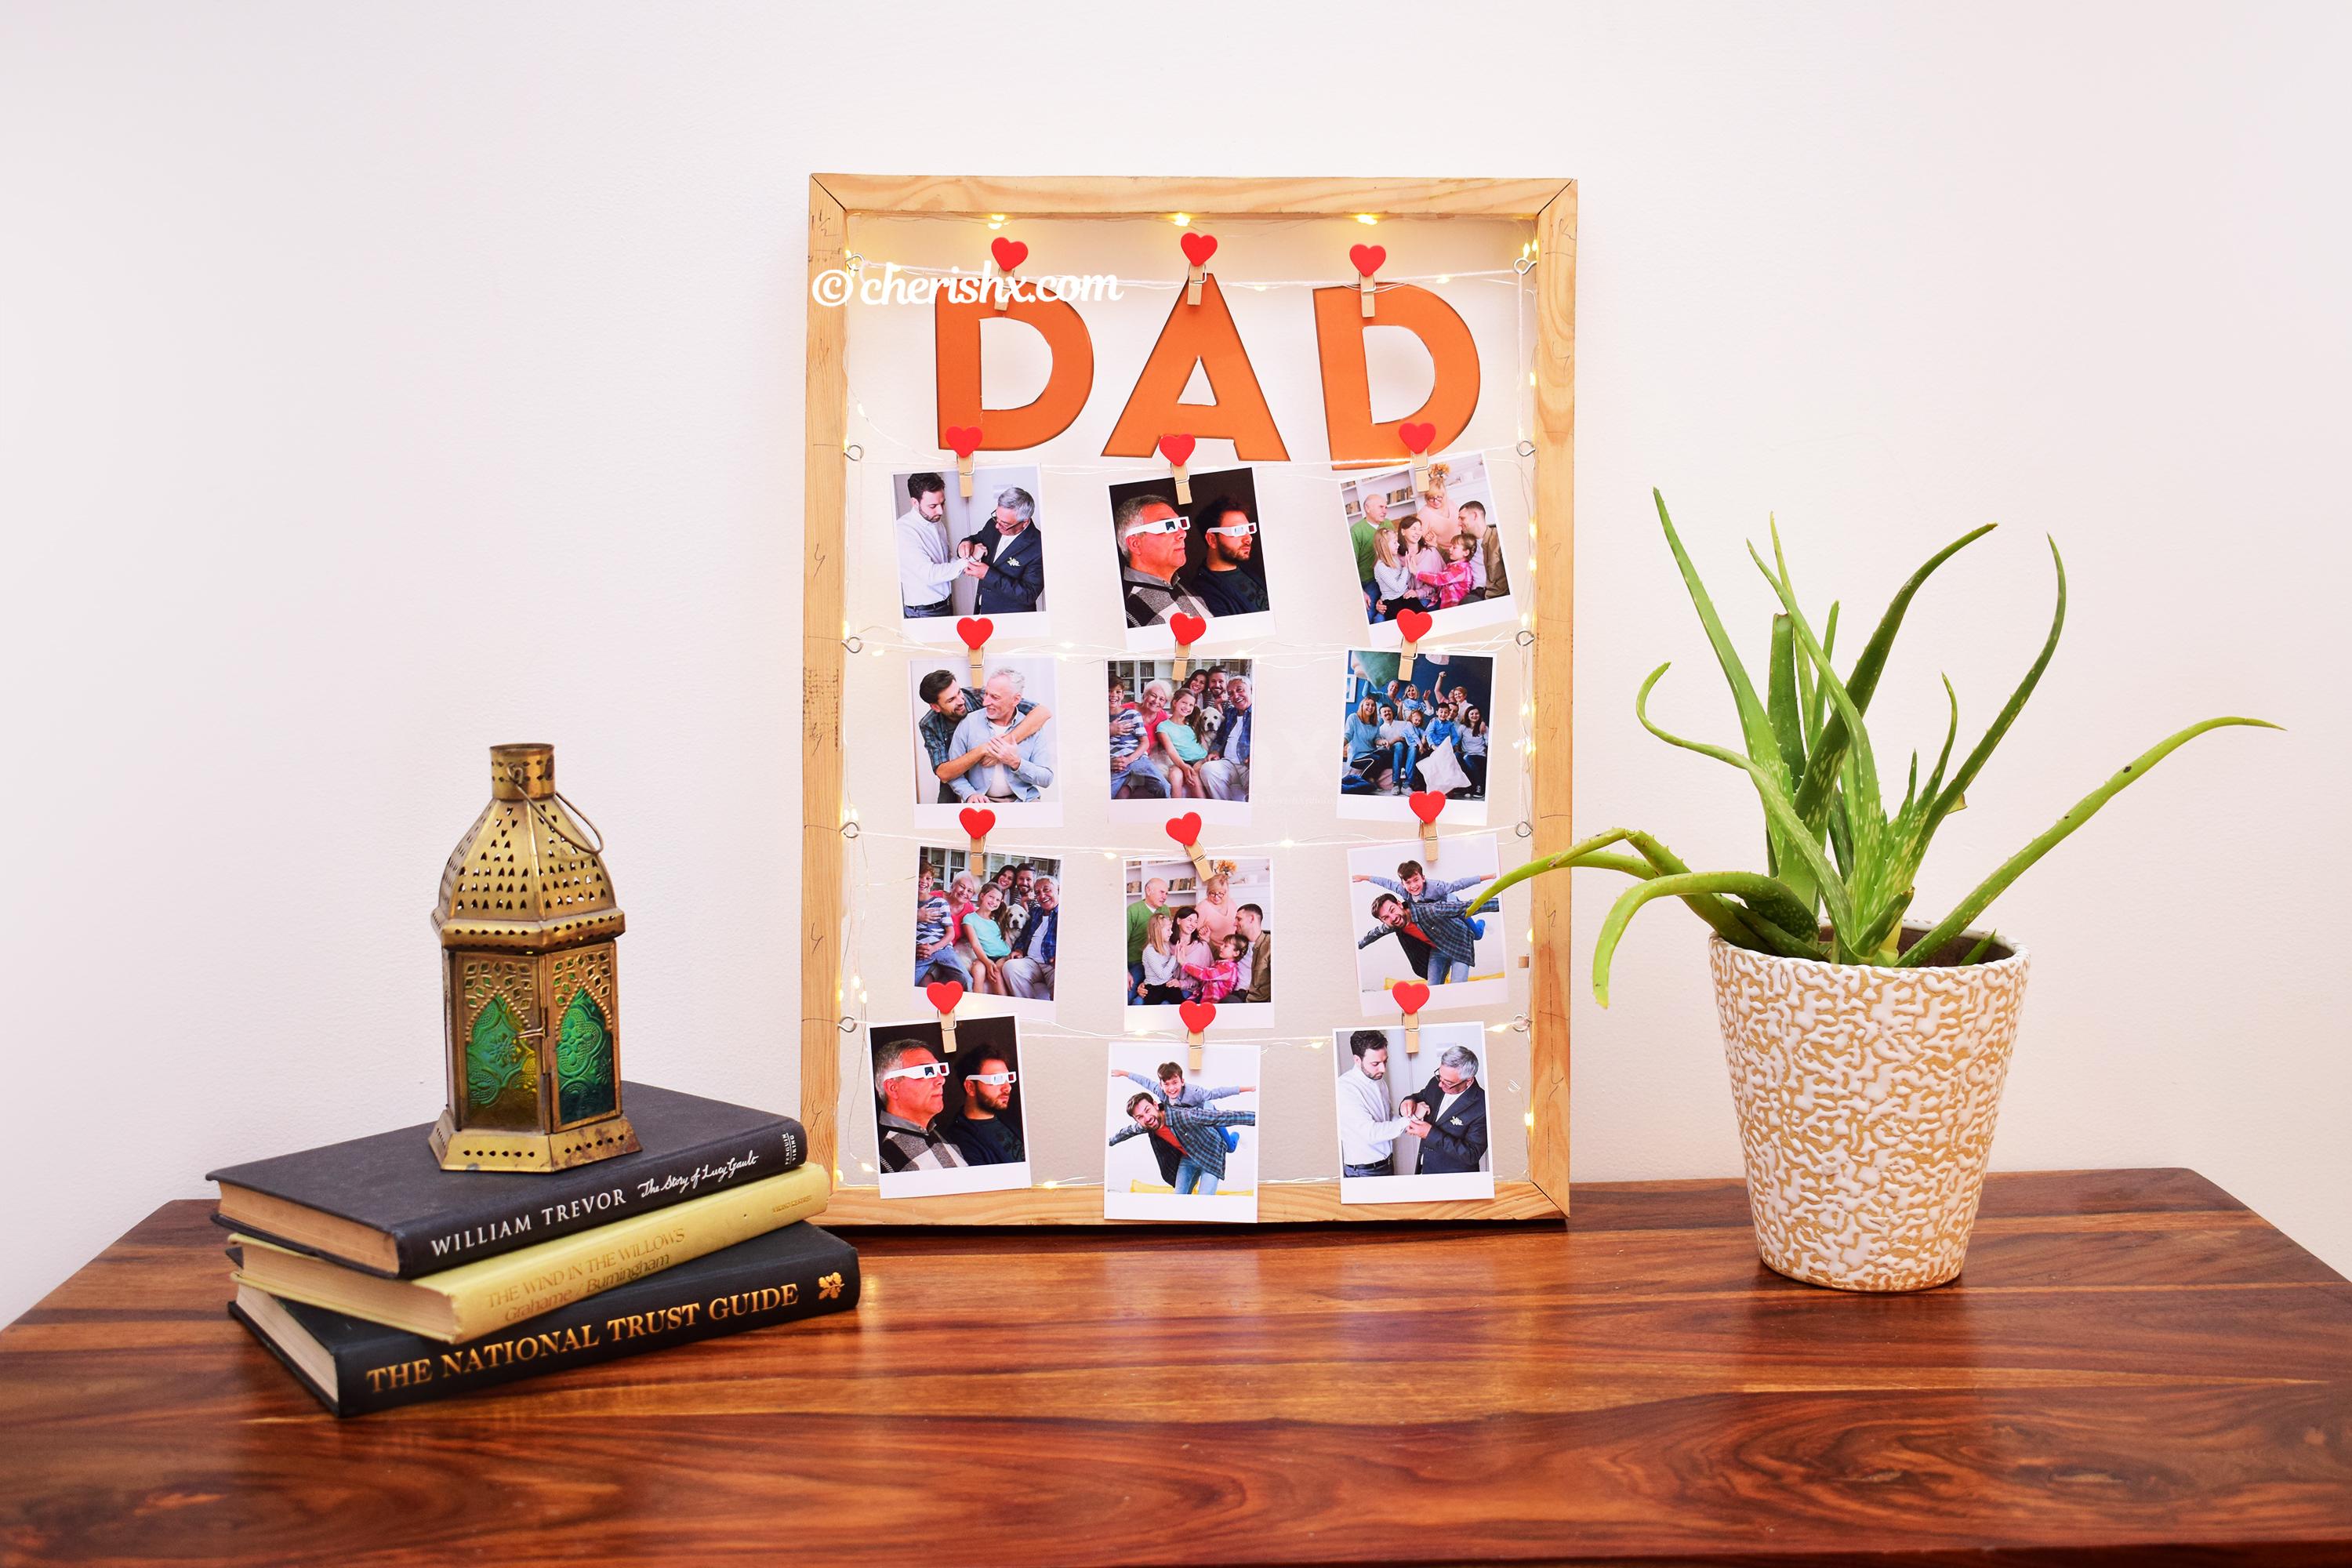 A loving 'DAD' Memory String for your father!